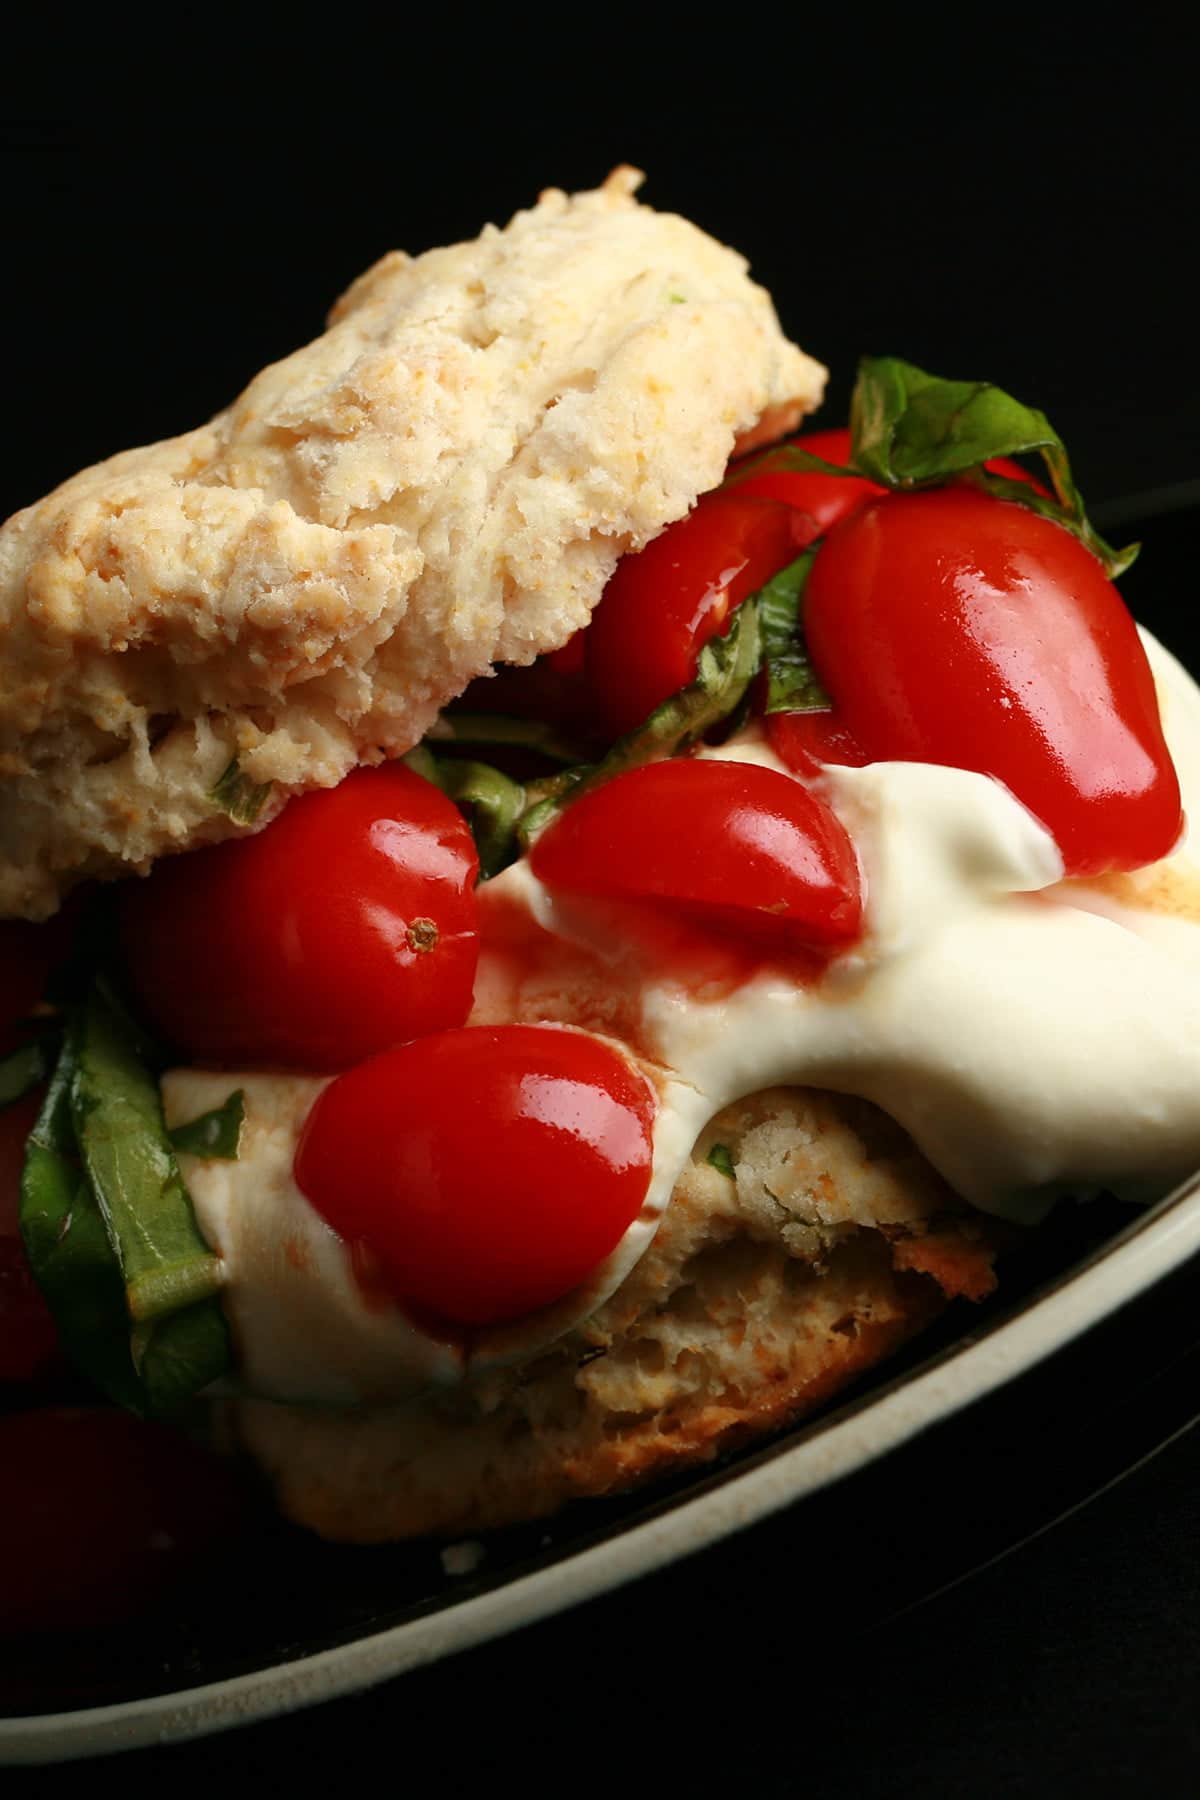 Savoury Tomato Shortcake: A baking powder biscuit "sandwich" on a small black plate.  The biscuit has soft white cheese, cherry tomatoes, and fresh basil as its filling.